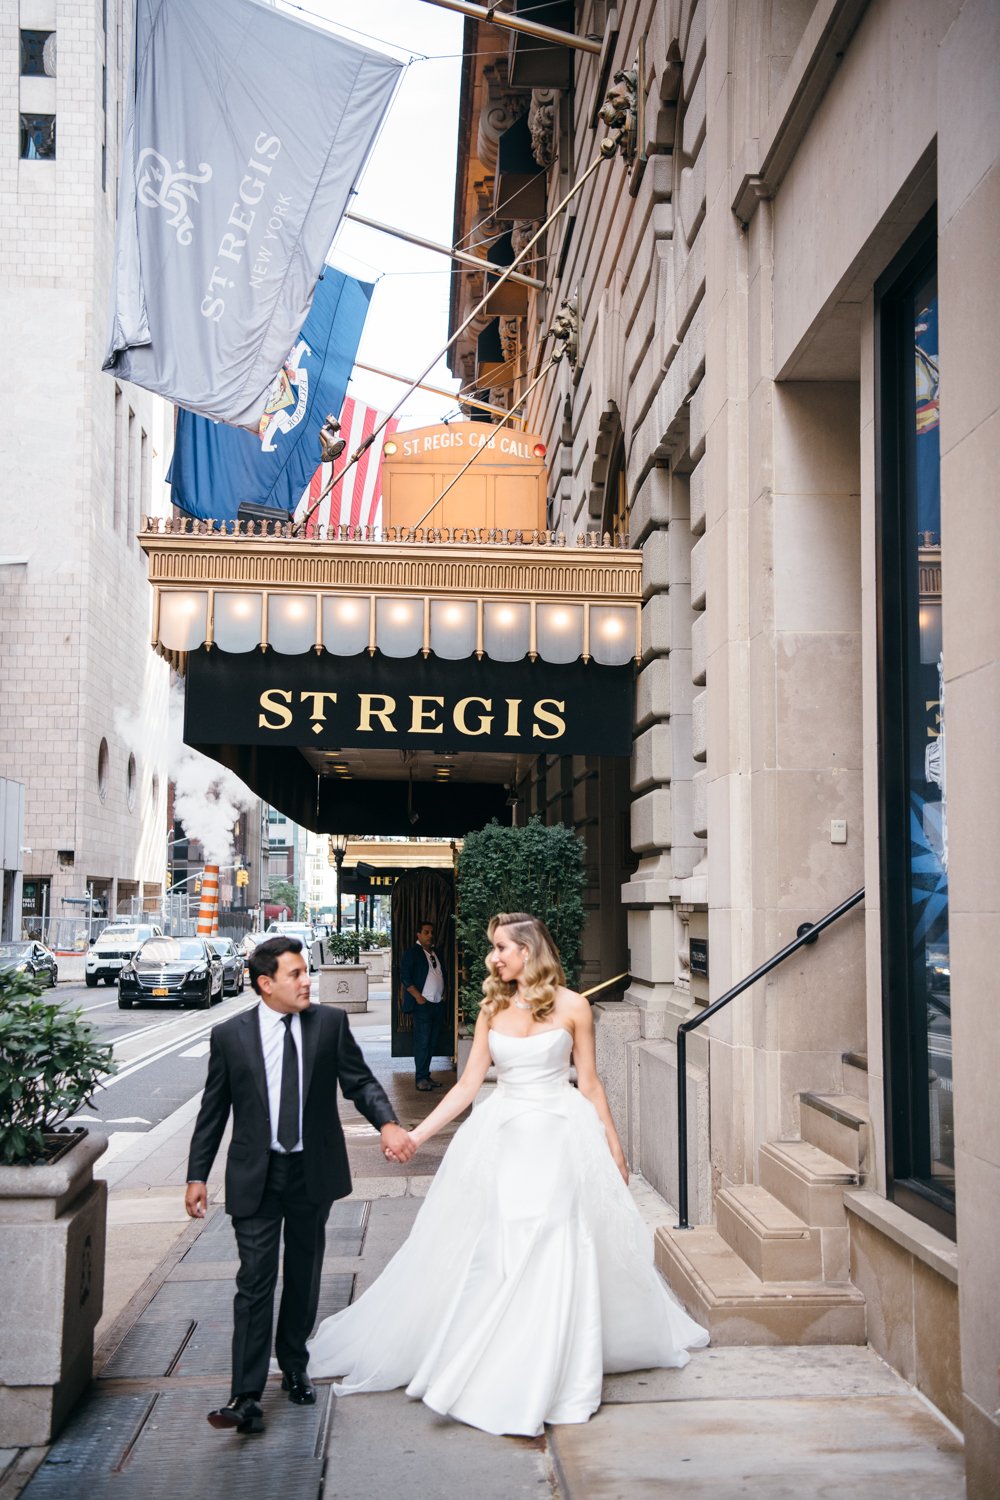 Bride and groom stand side by side holding hands outside the St. Regis in Manhattan. The "St. Regis" awning and "St. Regis" flag are above them.

Manhattan Luxury Wedding. New York Luxury Wedding Photographer. Wedding in Manhattan. NYC Luxury Wedding. Manhattan Bridal Portraits.